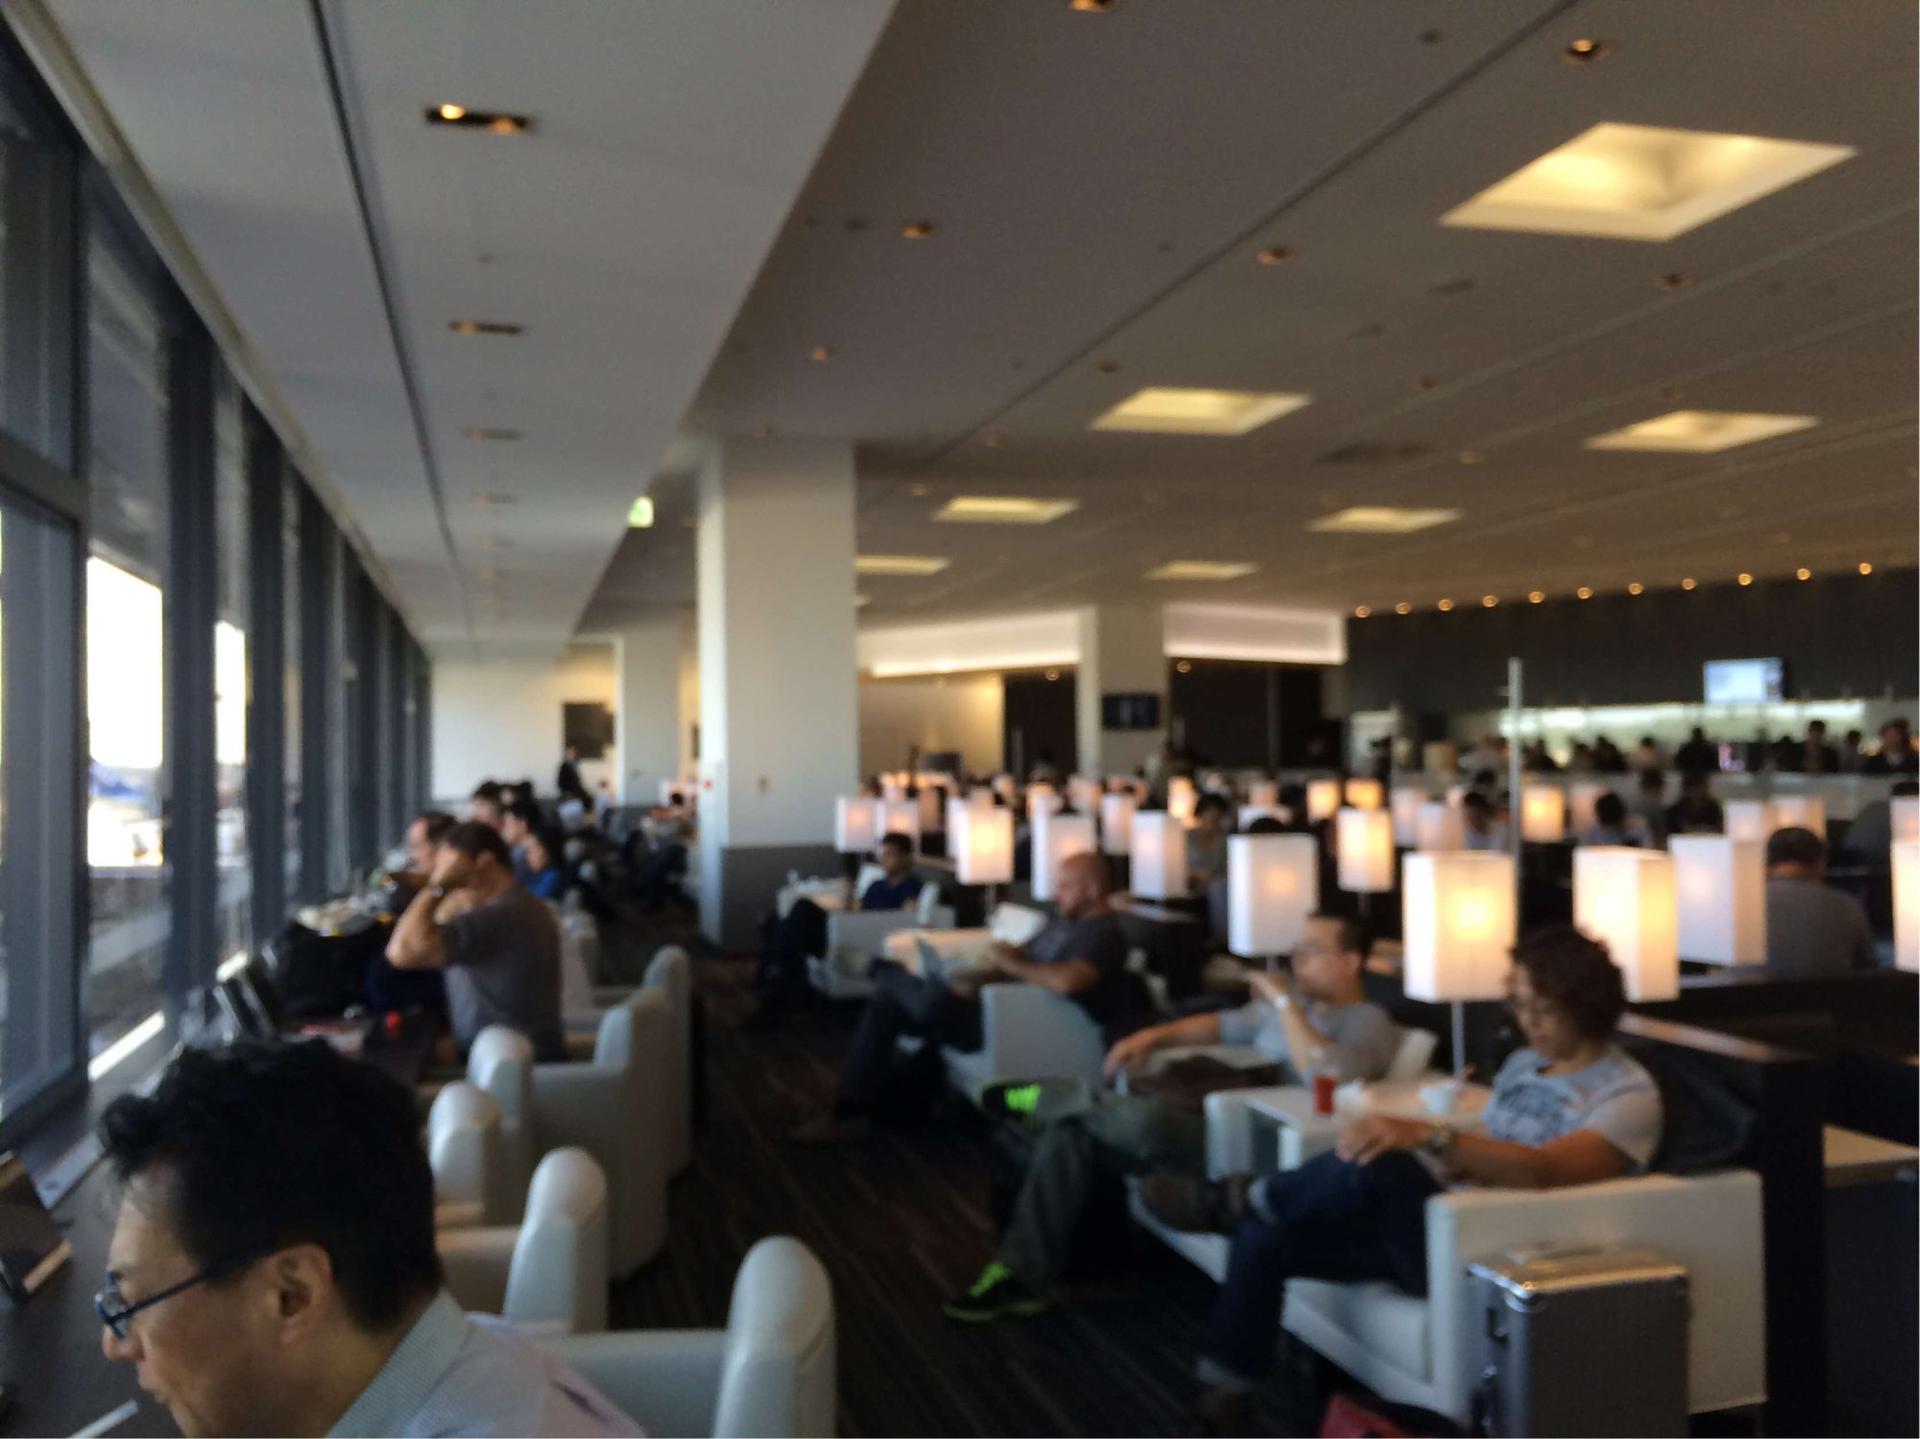 All Nippon Airways ANA Lounge image 14 of 39